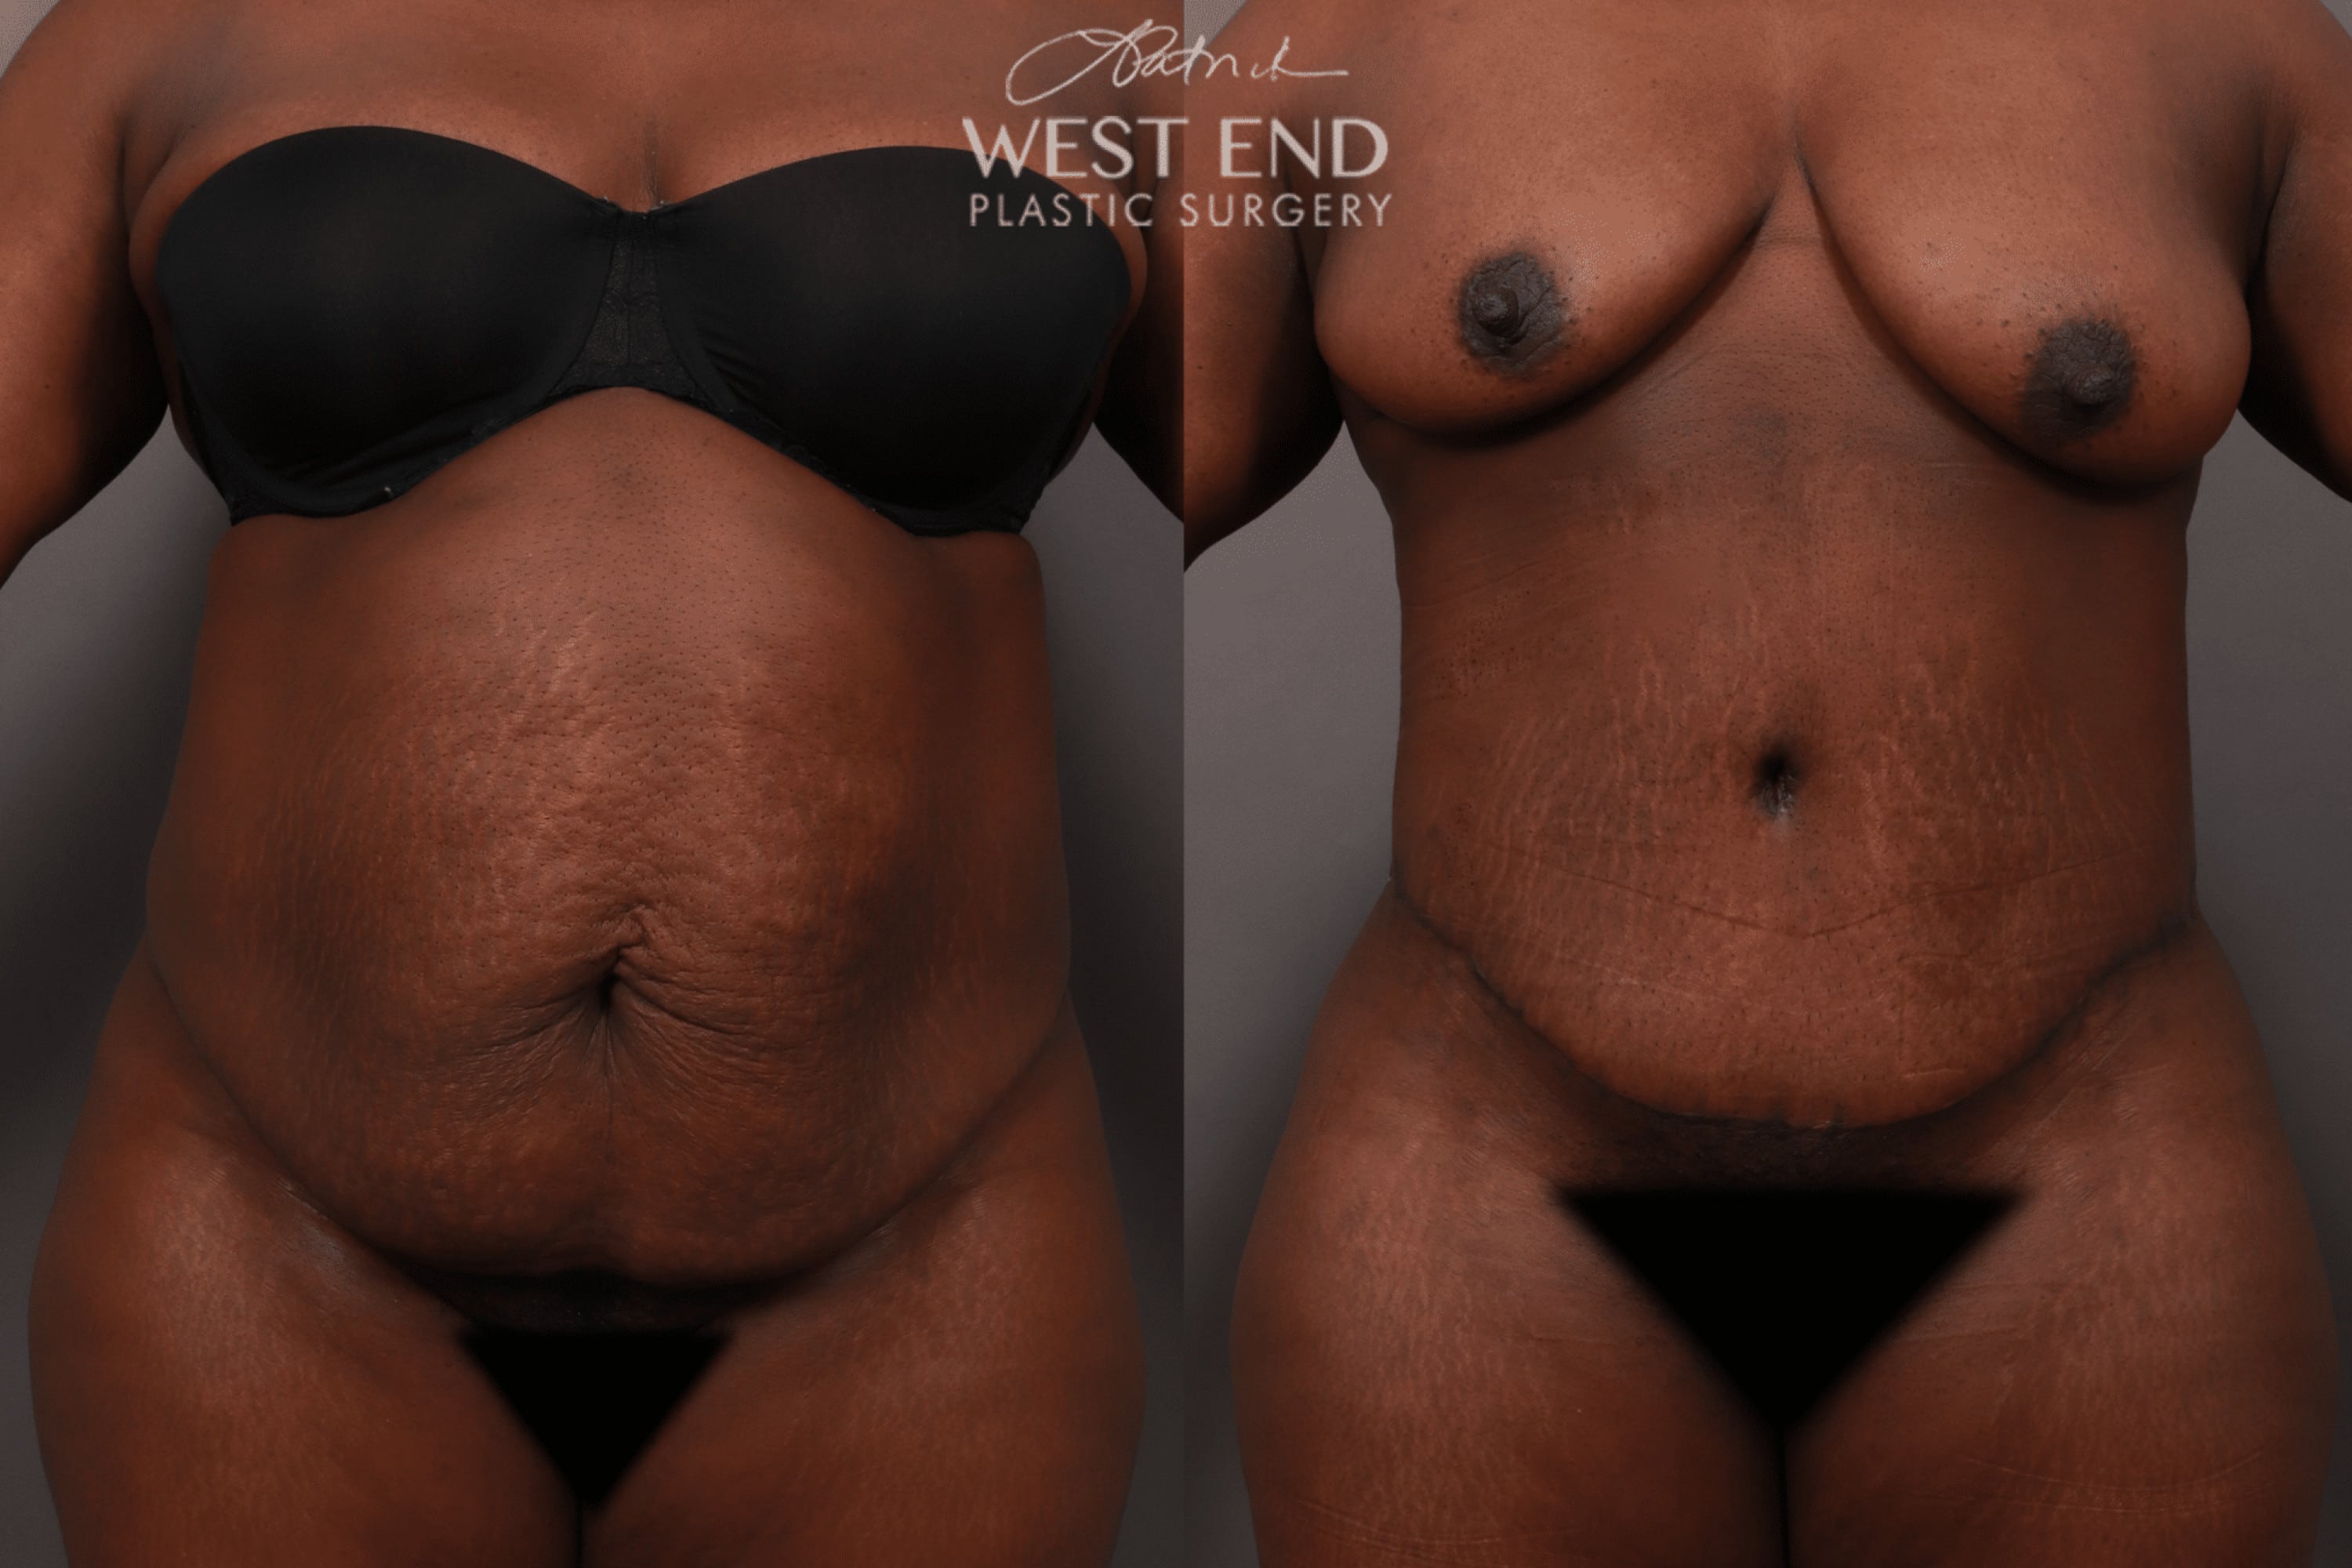 Tummy Tuck with Liposuction (5.5 Months Post-Op)